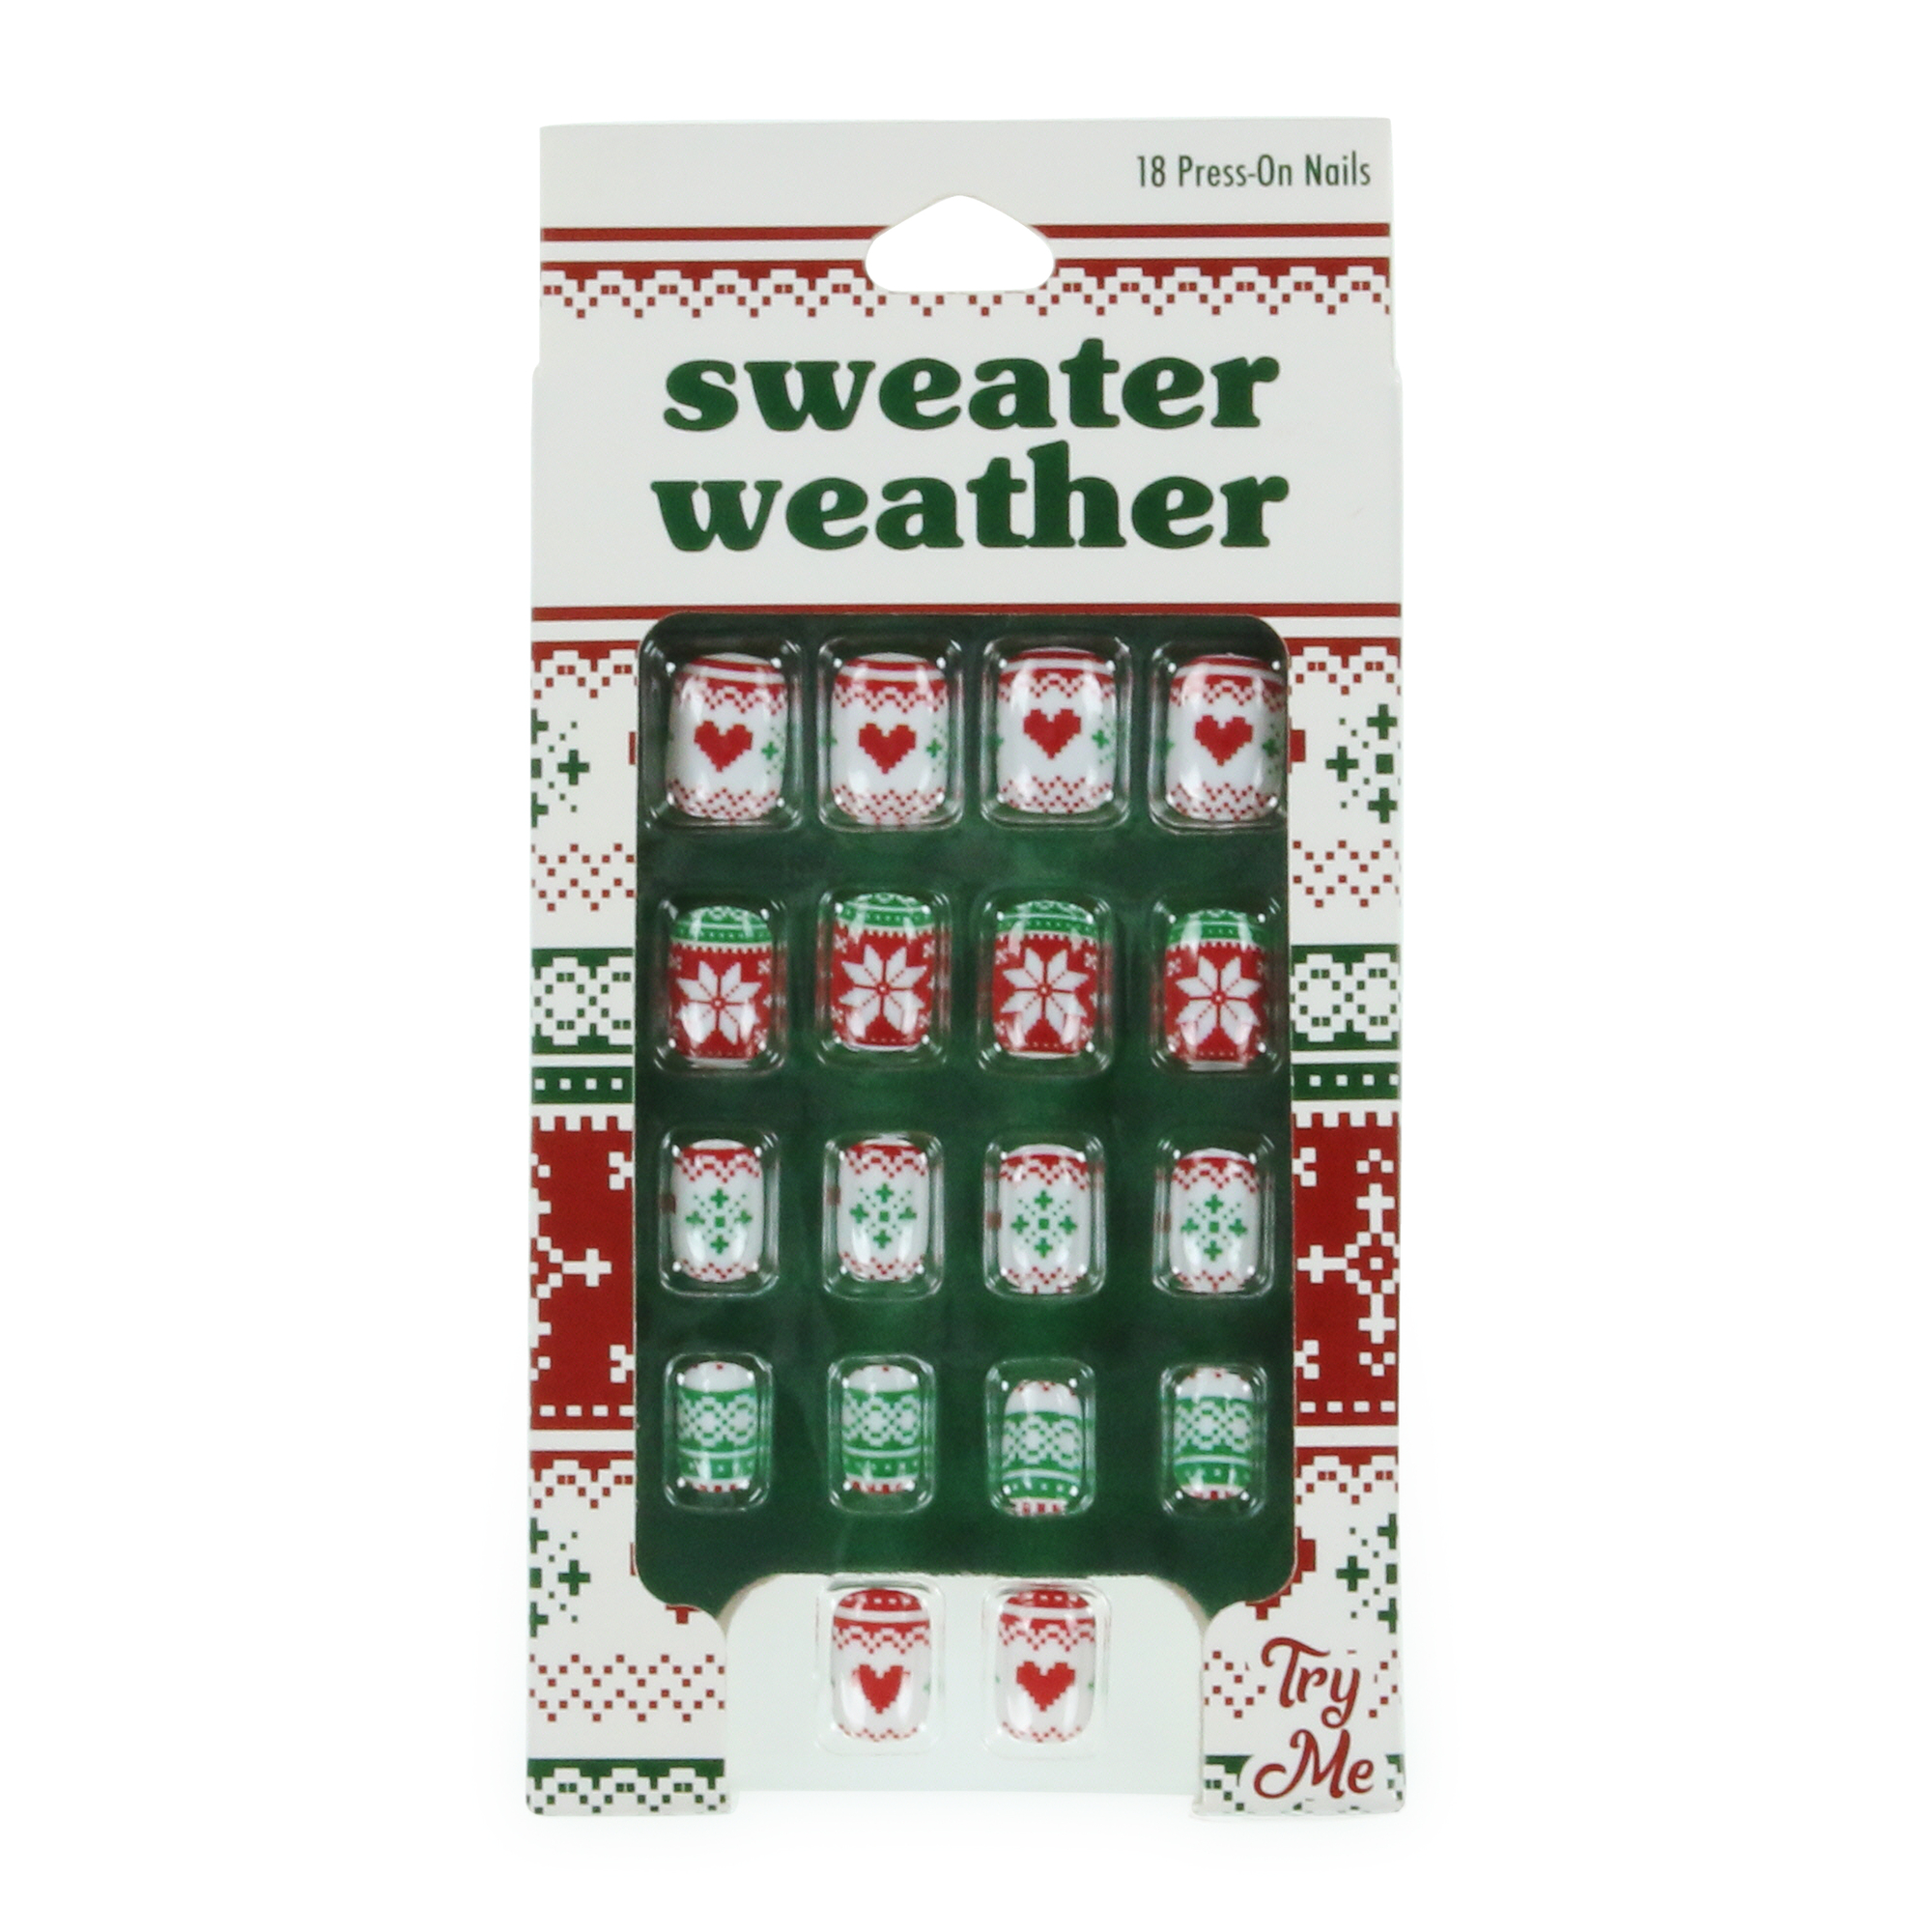 sweater weather press-on nails 18-piece set